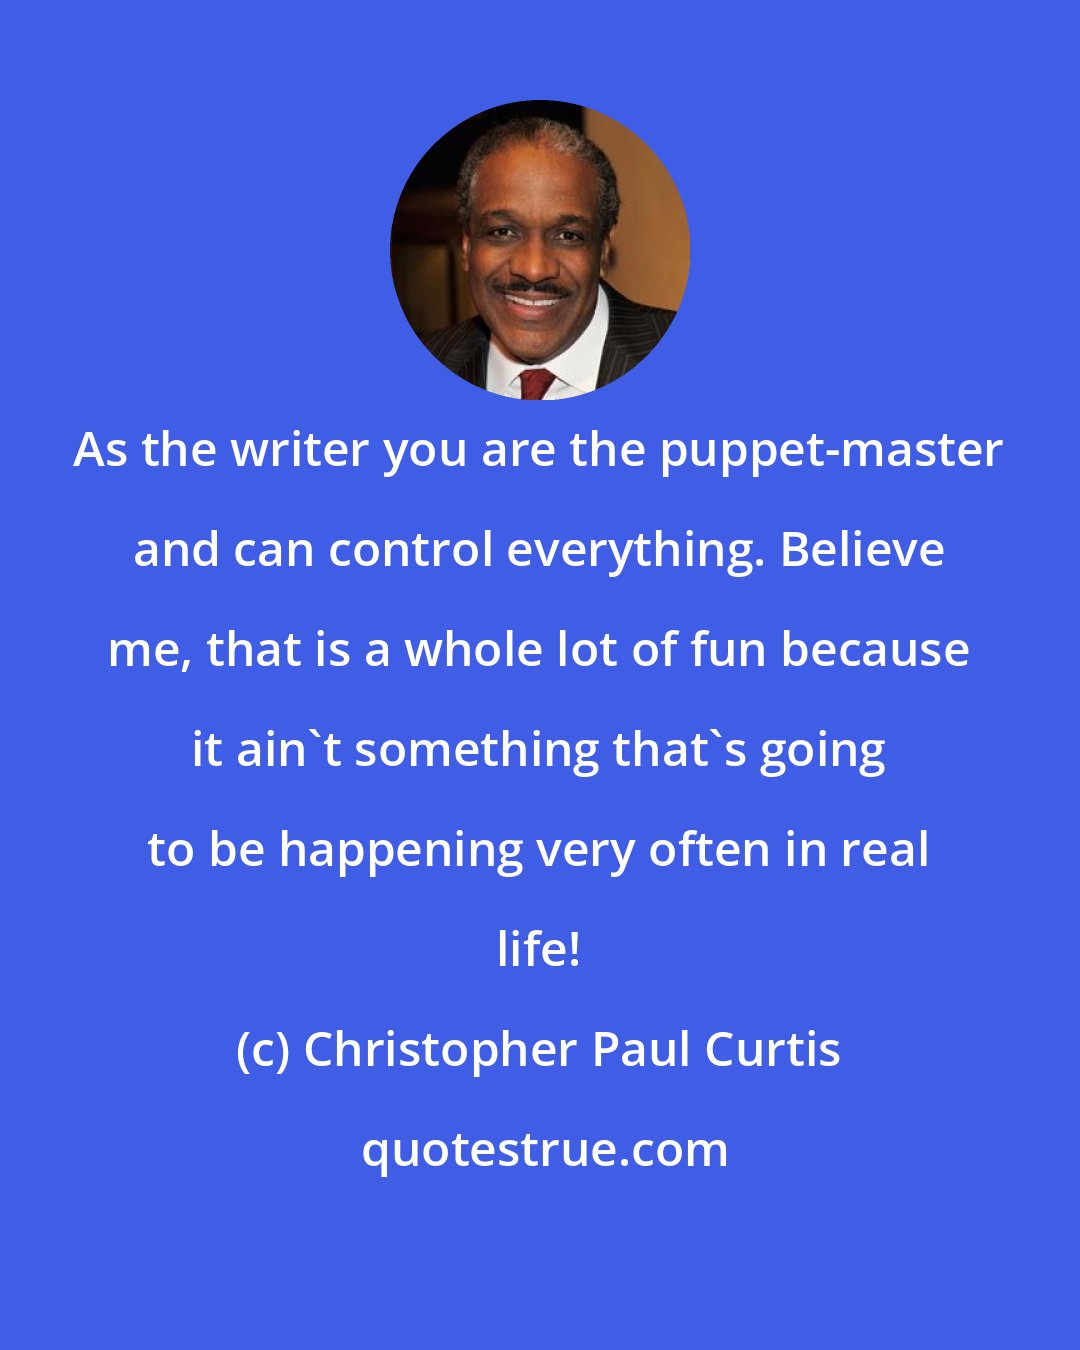 Christopher Paul Curtis: As the writer you are the puppet-master and can control everything. Believe me, that is a whole lot of fun because it ain't something that's going to be happening very often in real life!